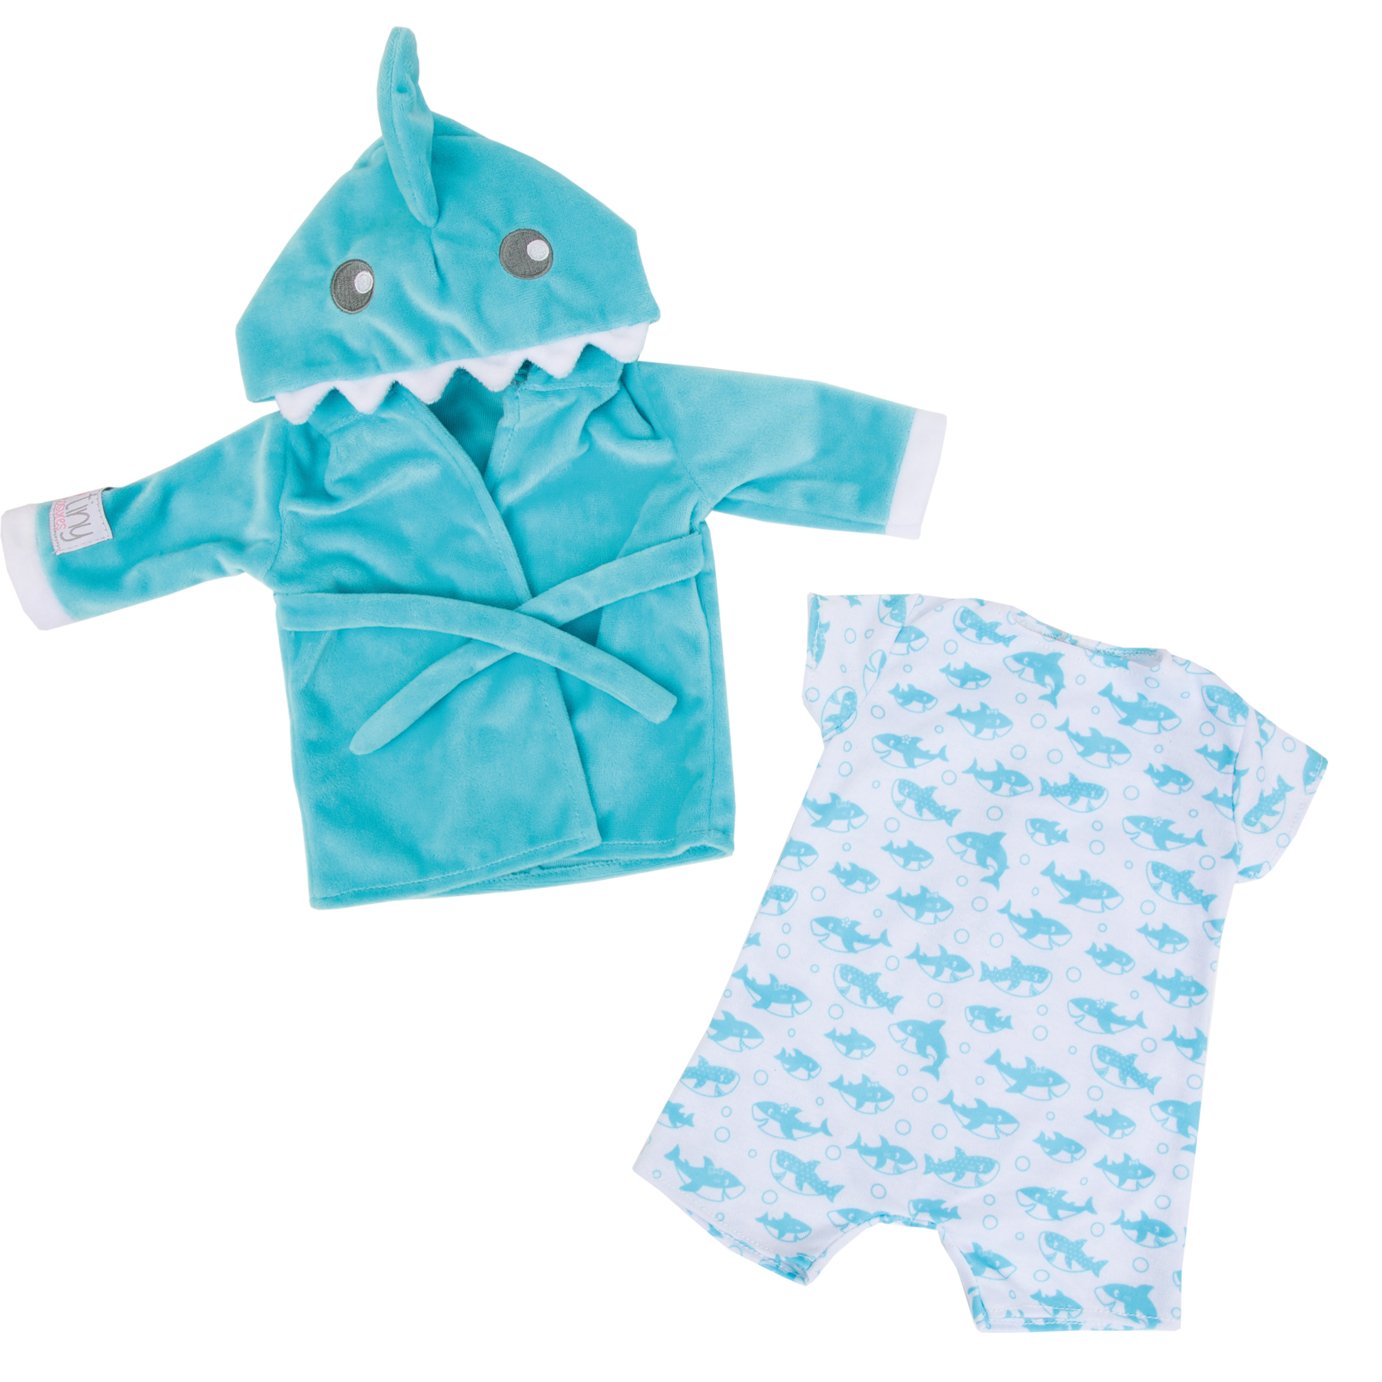 Tiny Treasures Baby Shark Outfit Review